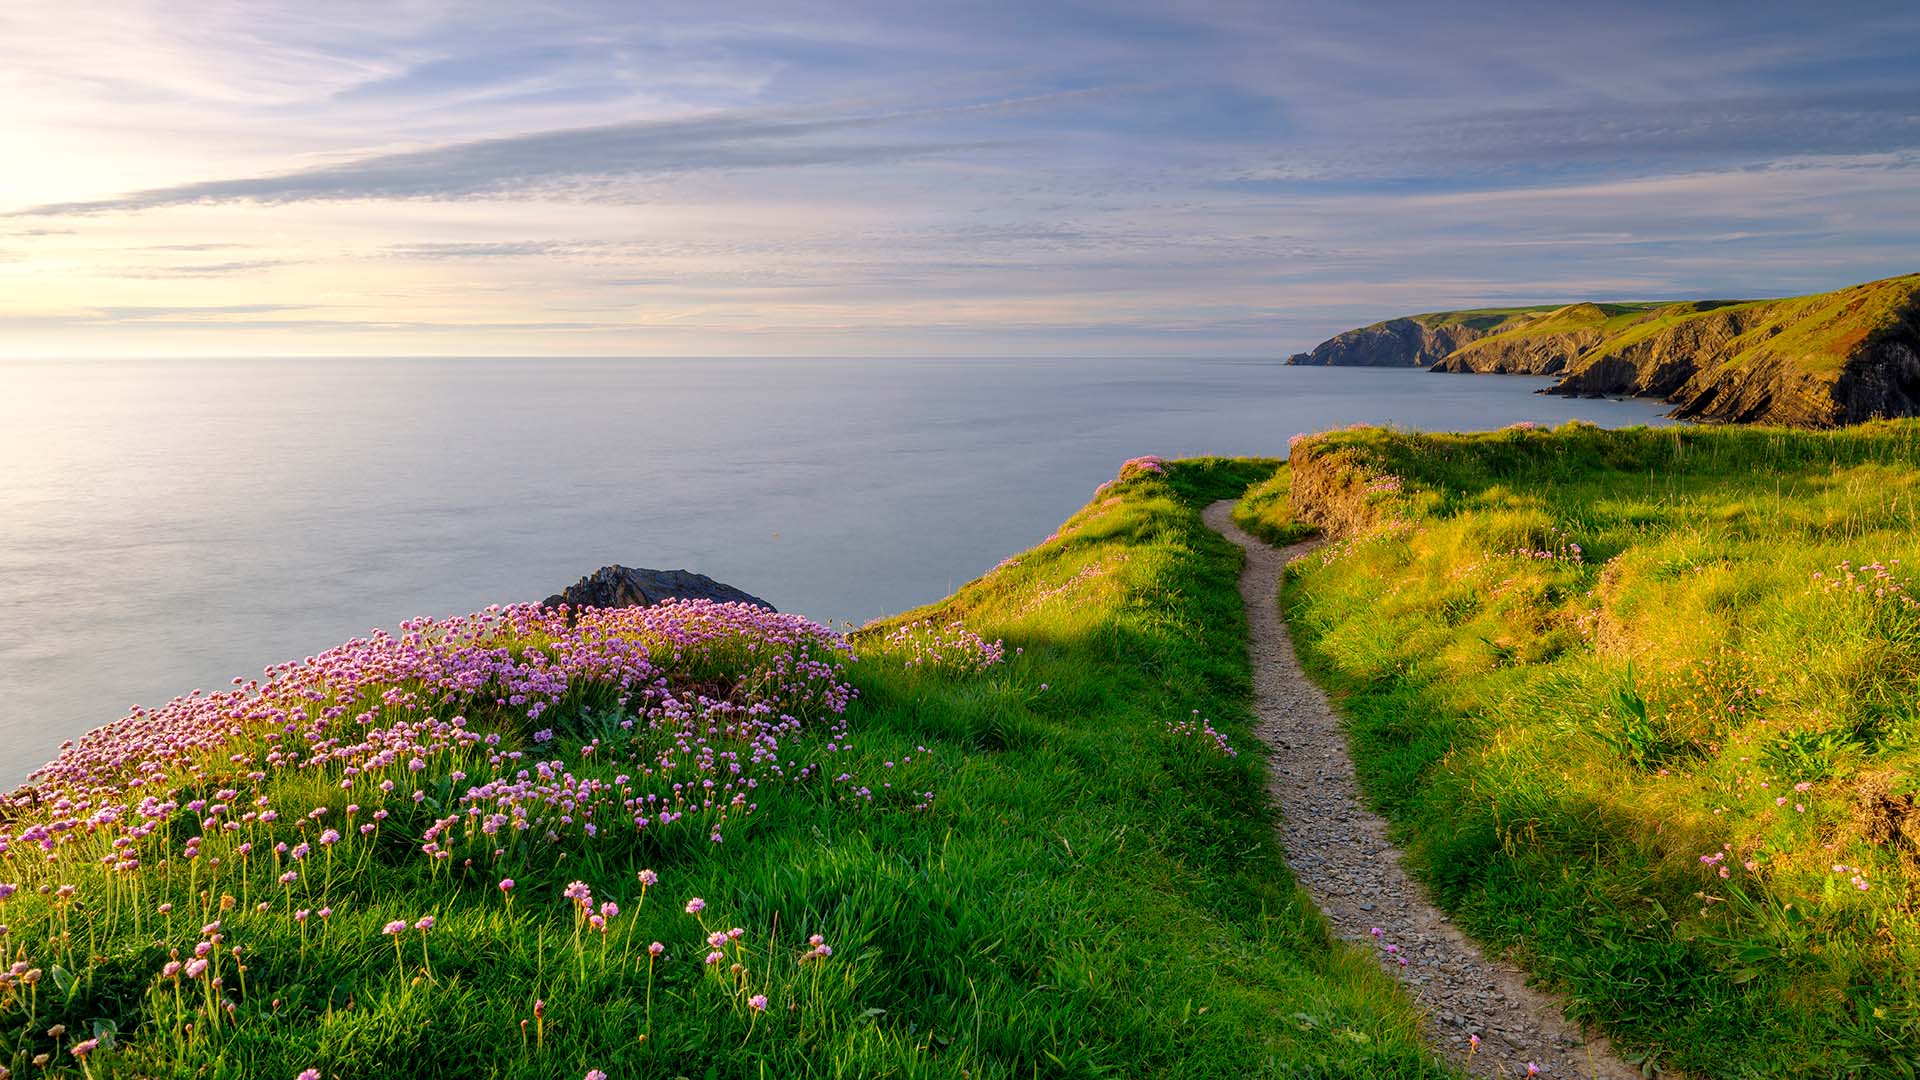 Wildflowers and green grass on cliffs on a pathway at Ceibwr Bay in Wales